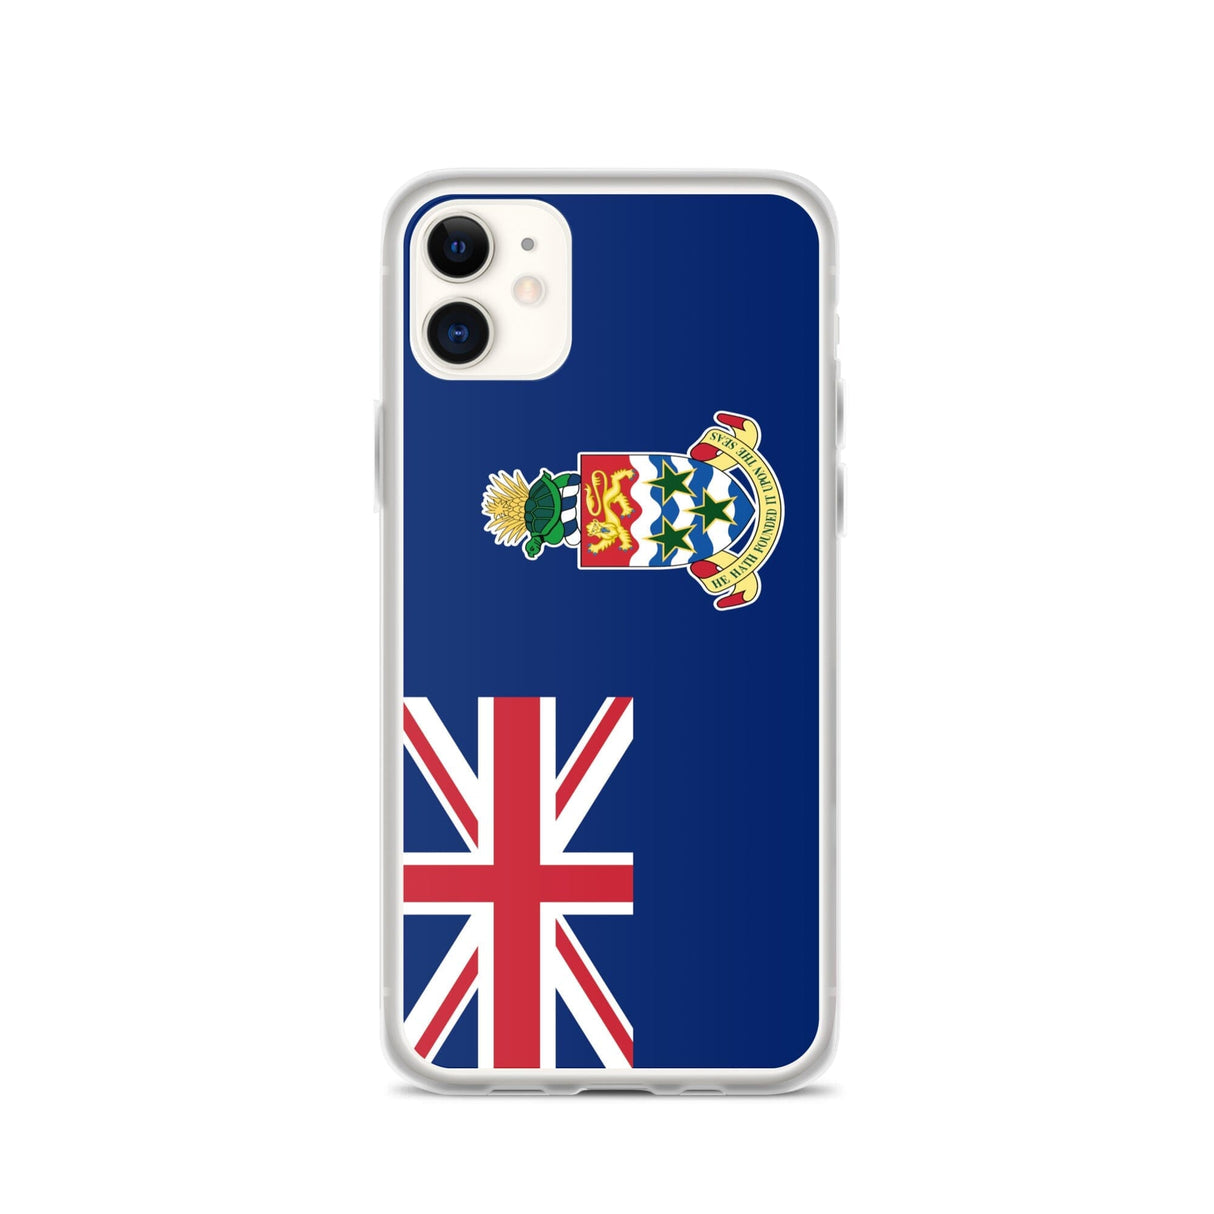 Flag of the Cayman Islands iPhone Case - Pixelforma